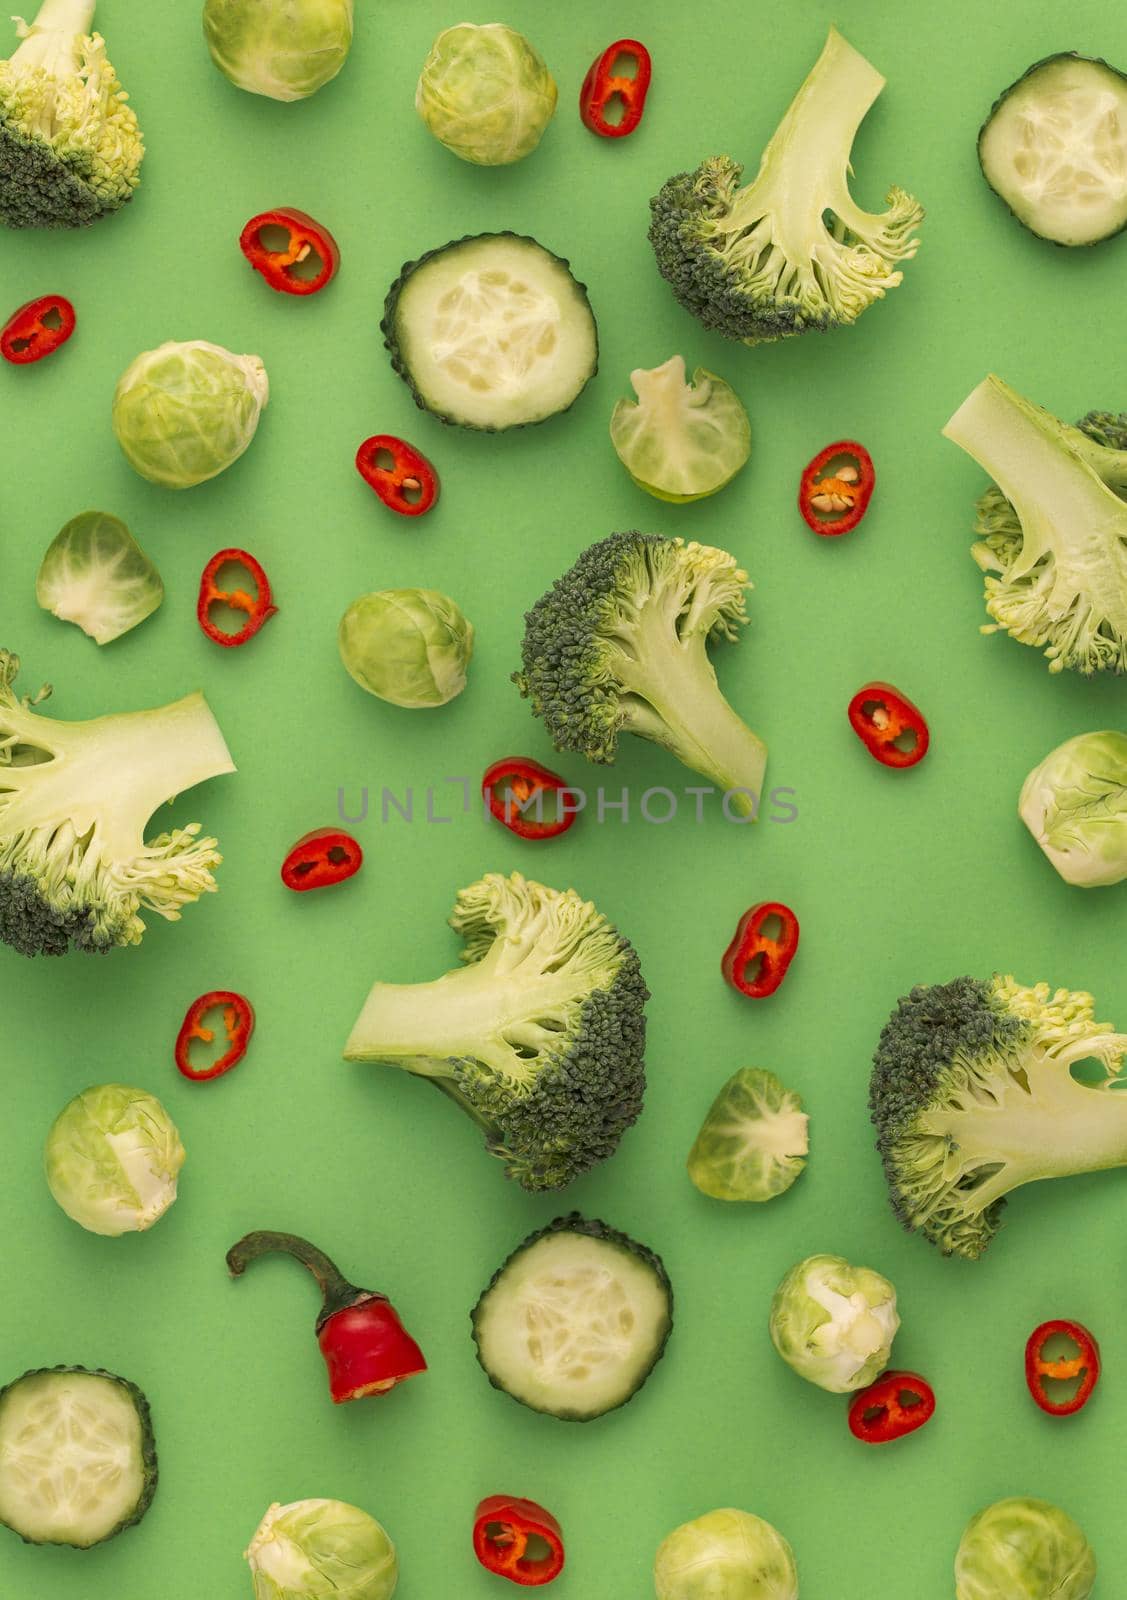 Colourful vegetables food pattern made of broccoli, Brussels sprouts, cucumber, chili pepper, green background. Minimal flat lay design about nutrition, healthy eating, diets, vitamins. Top view